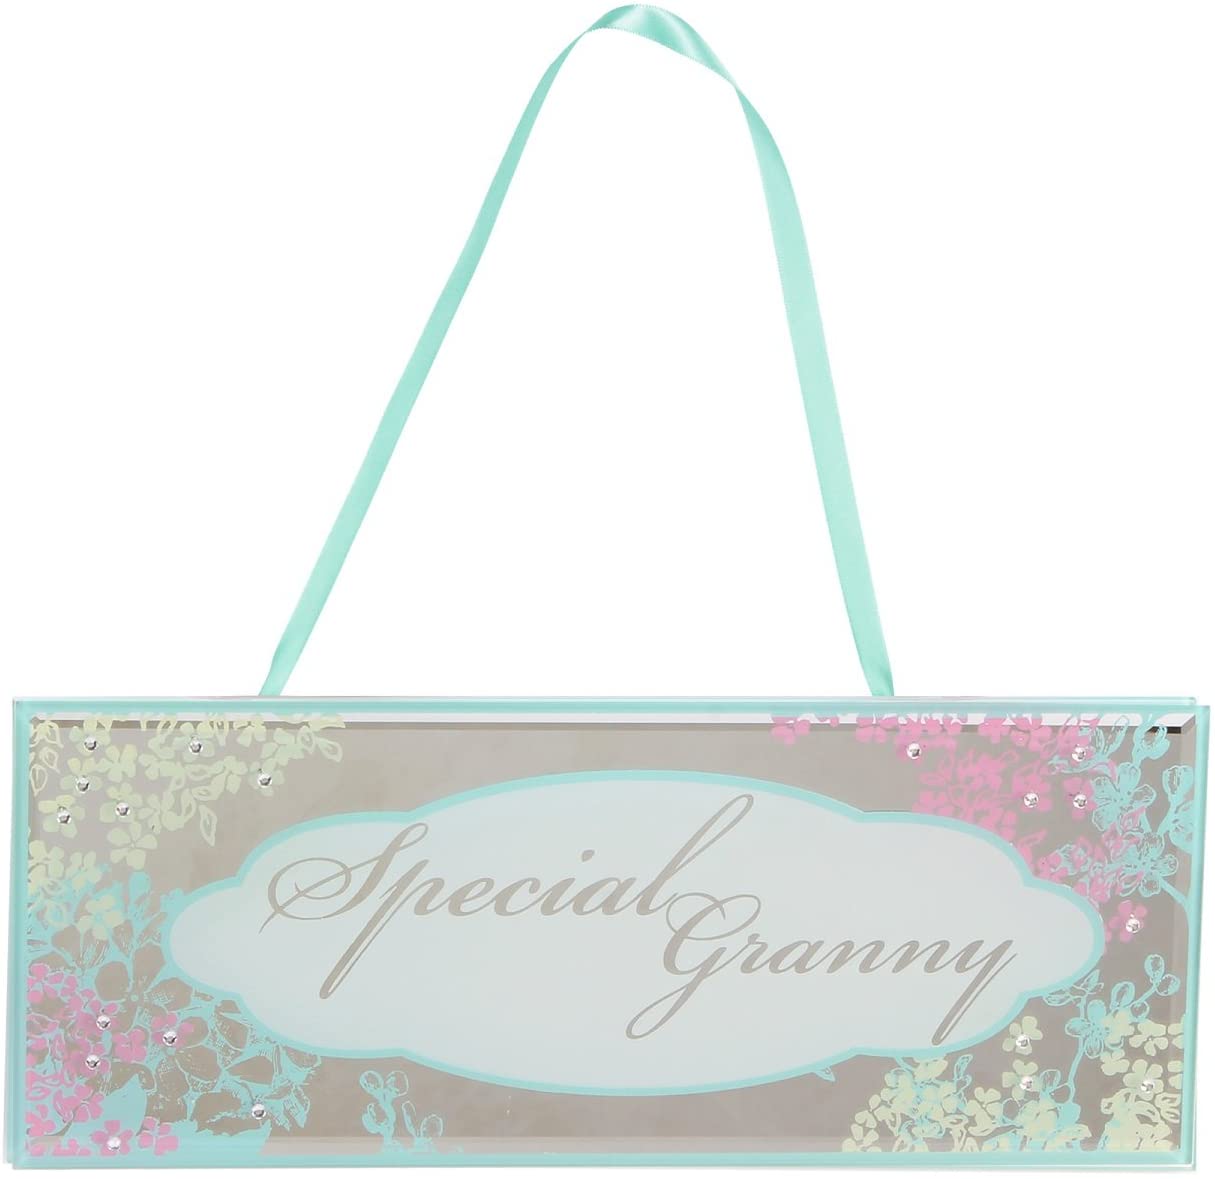 Special Granny Glass Pretty Floral Mirrored Hanging Plaque RRP £9.99 CLEARANCE XL £3.99